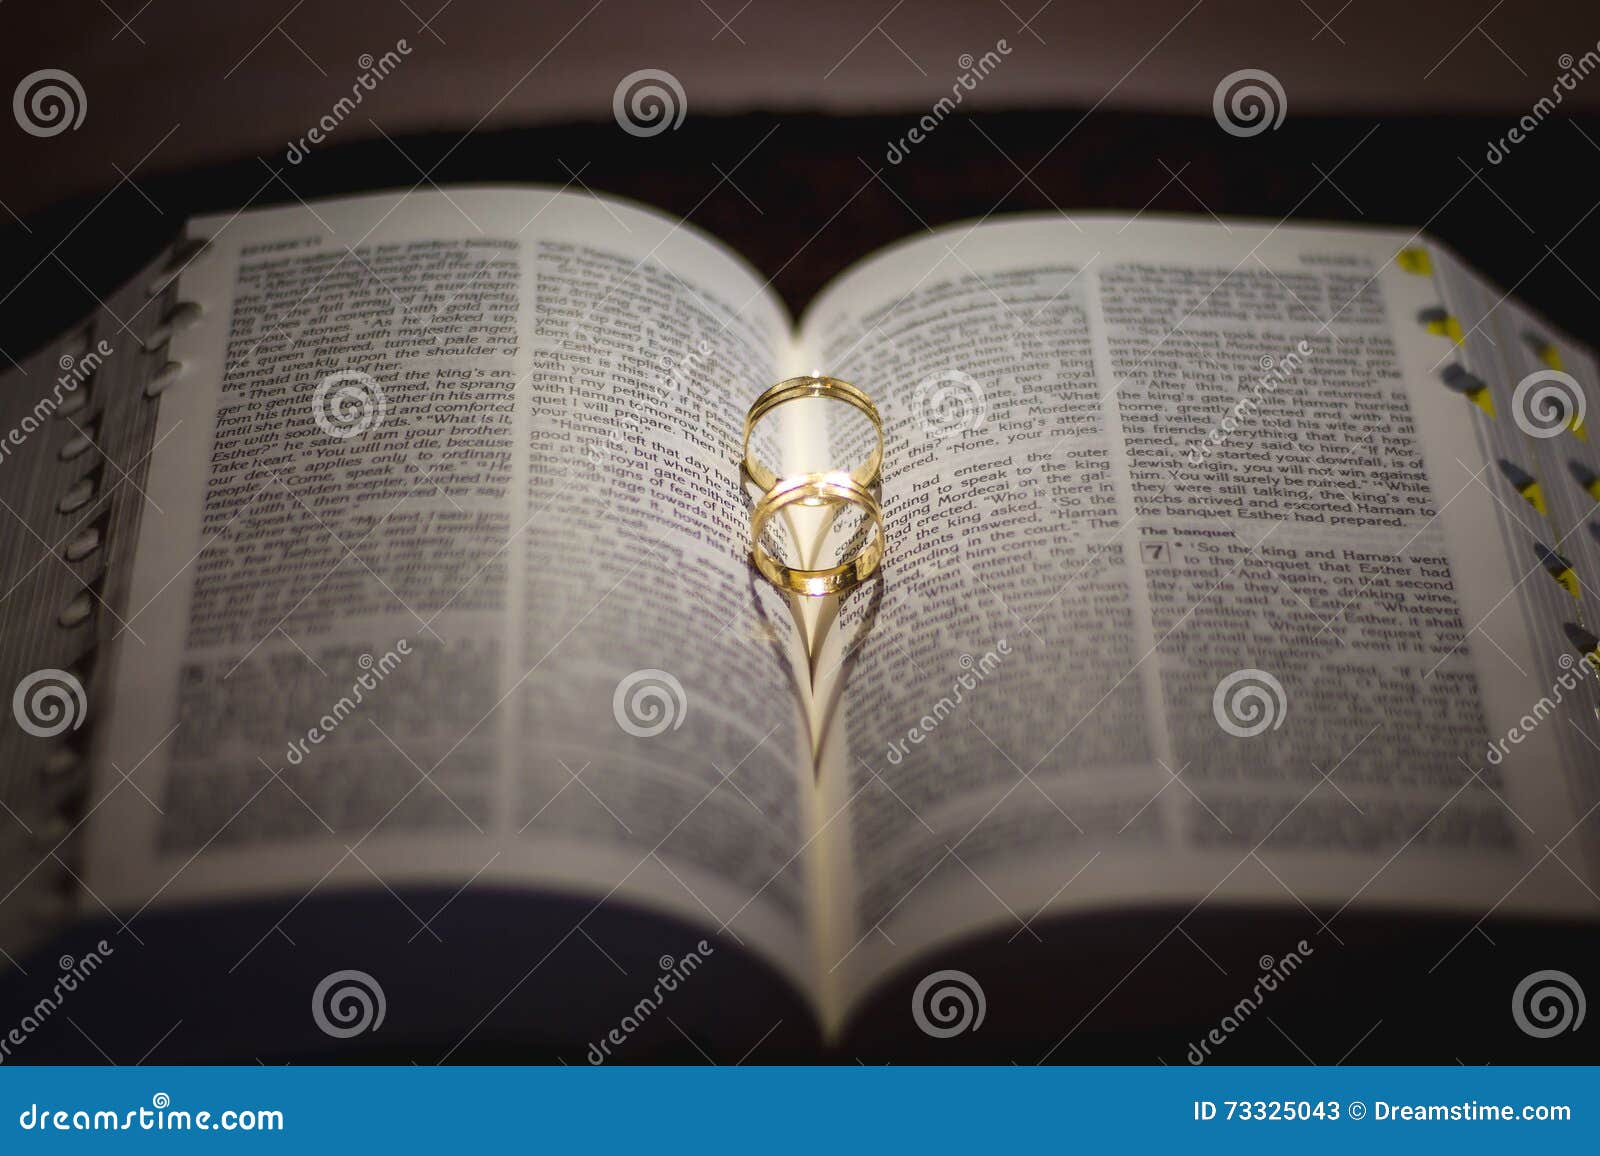 ring shot on the bible